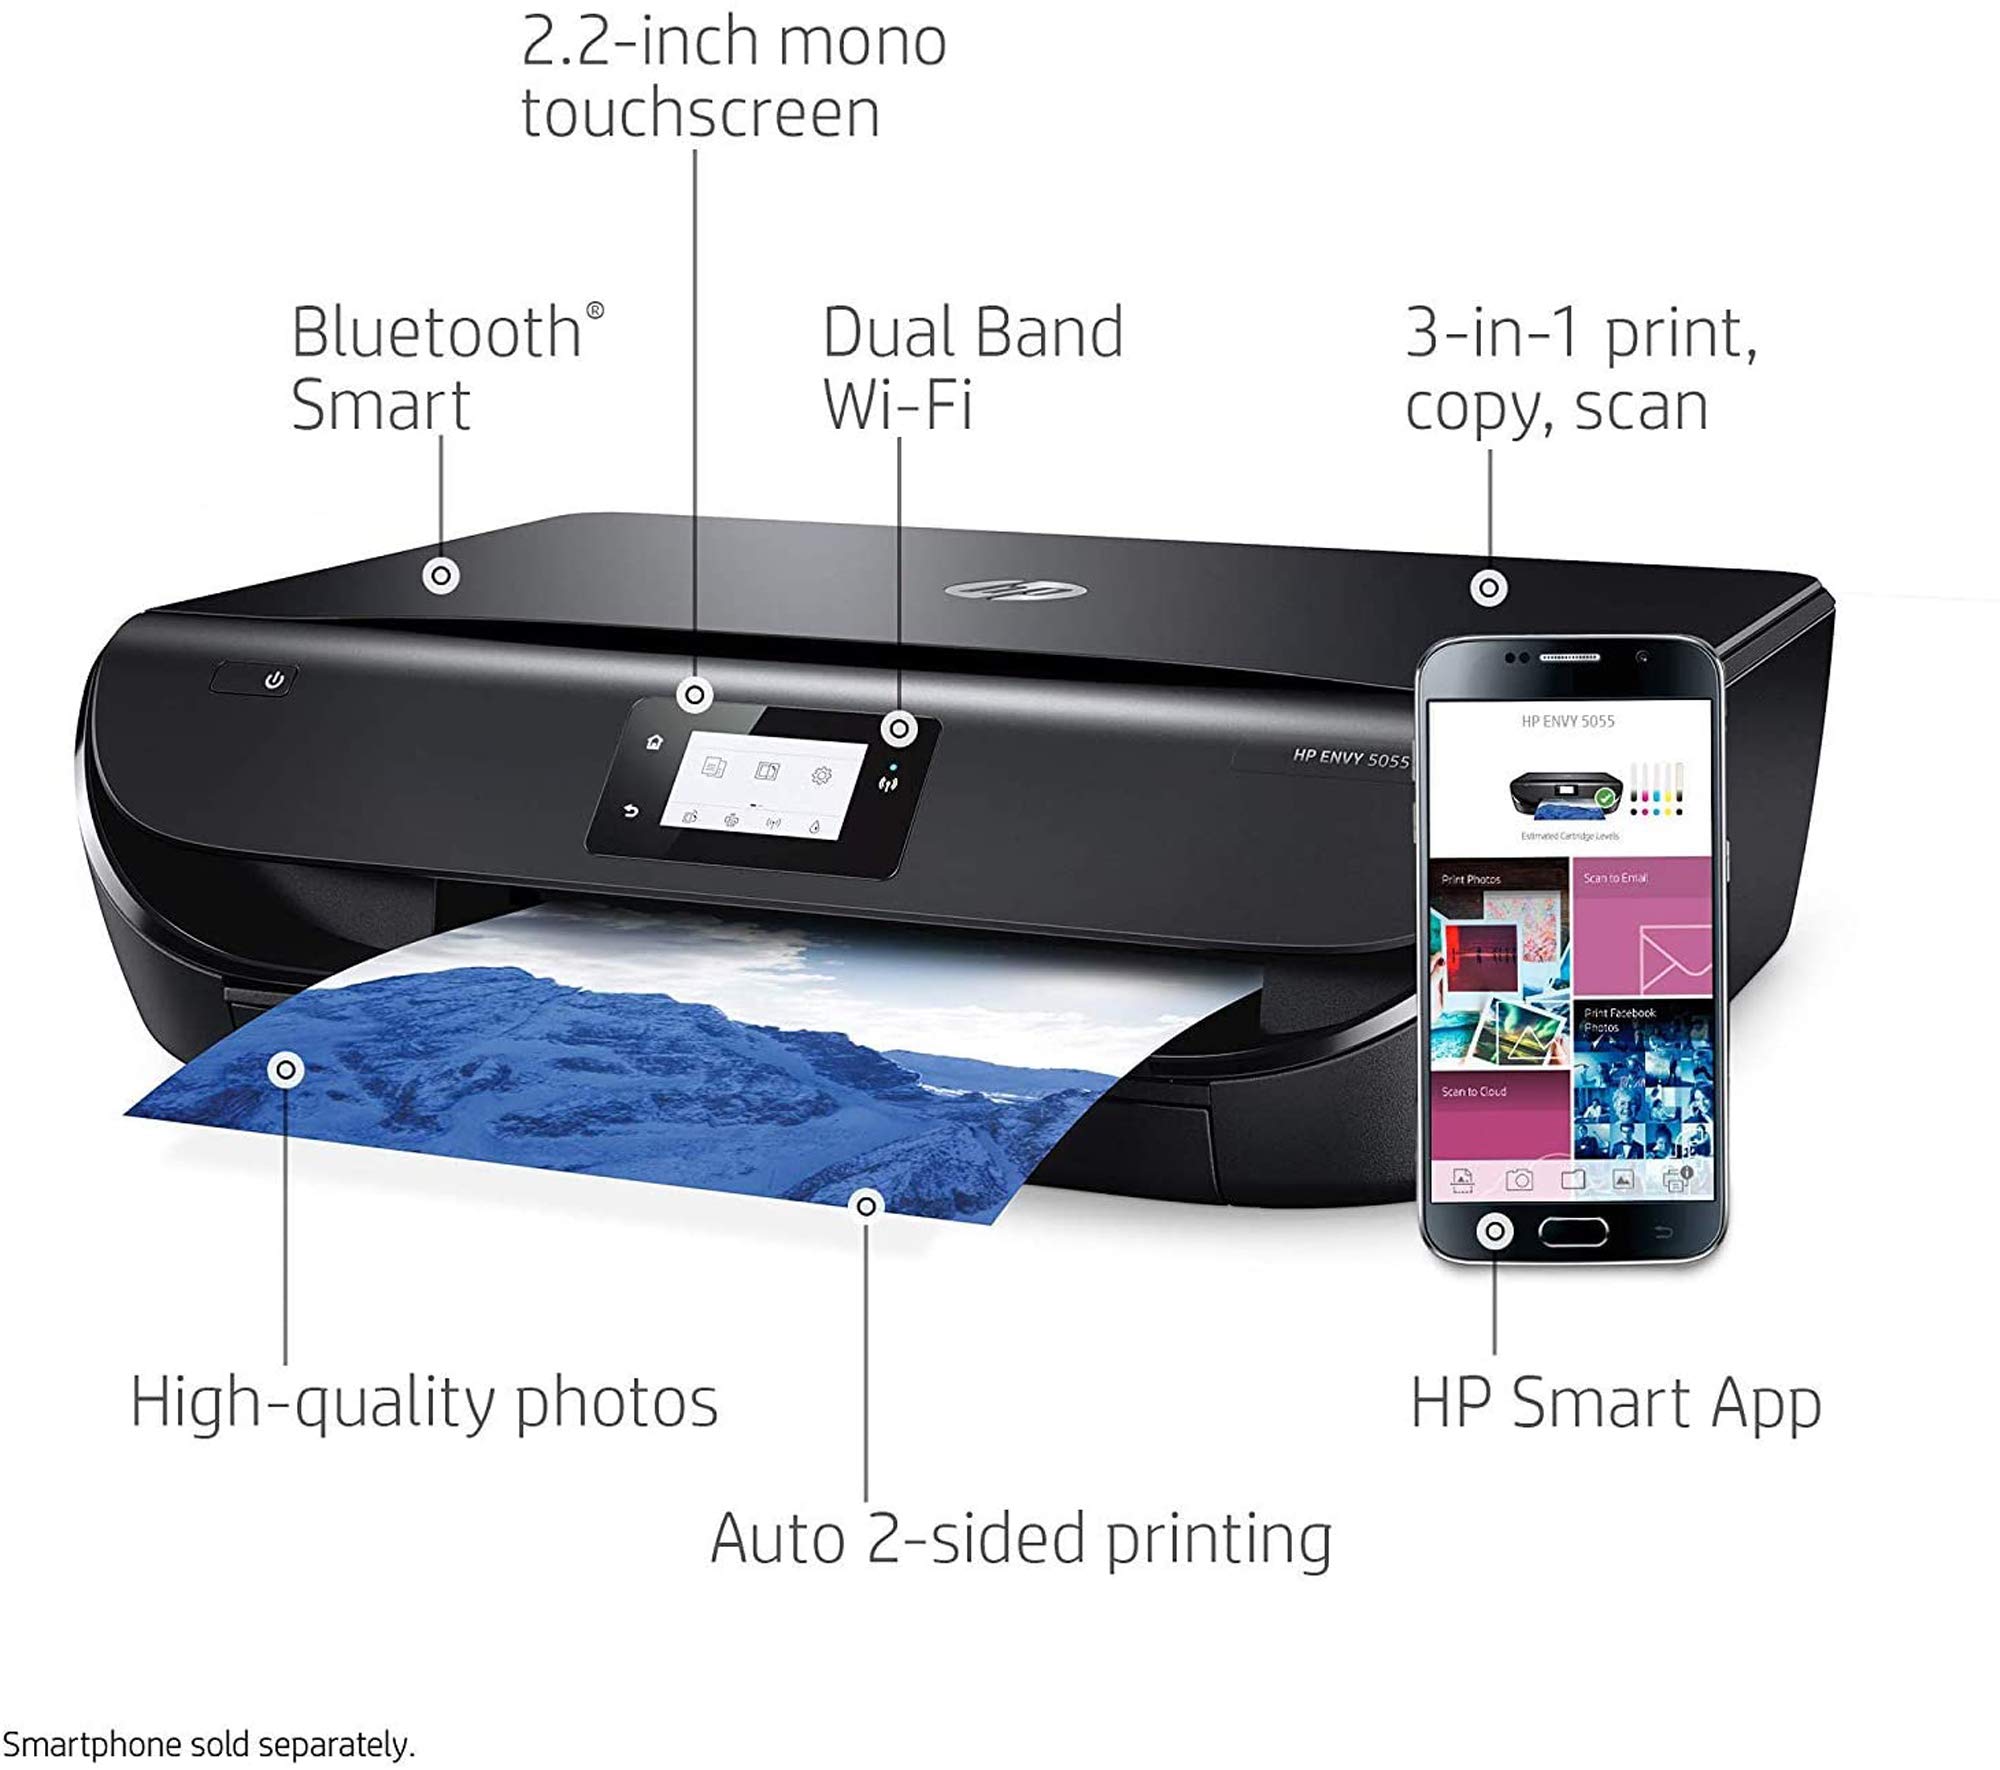 HP ENVY 5055 Wireless All-in-One Color Photo Printer, HP Instant Ink, Works with Alexa (M2U85A)